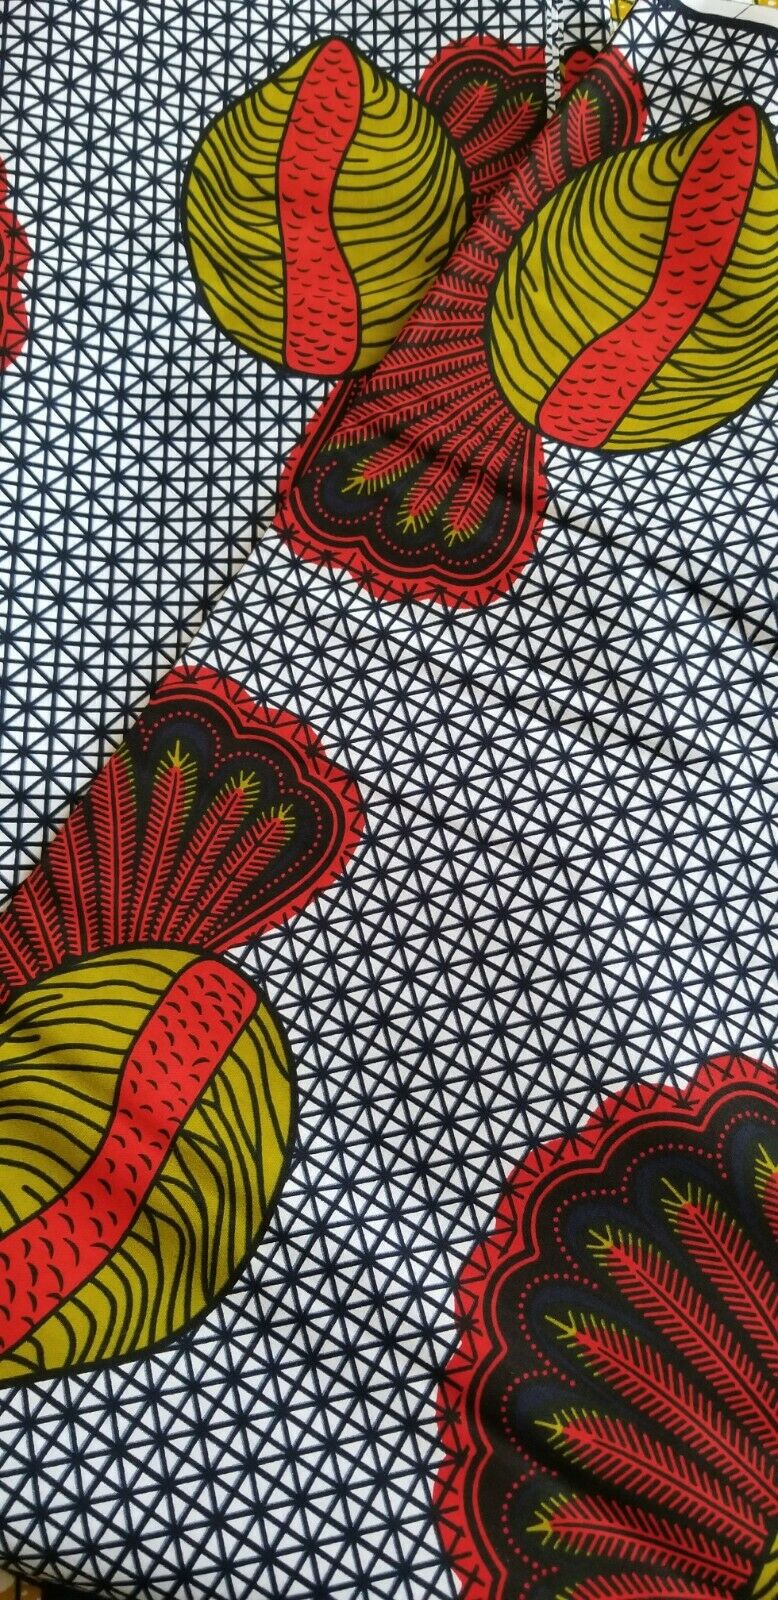 MULTICOLOR African Print 100% Cotton (snails ~fruitful)3yrds ×(44 in.) ~$15.25